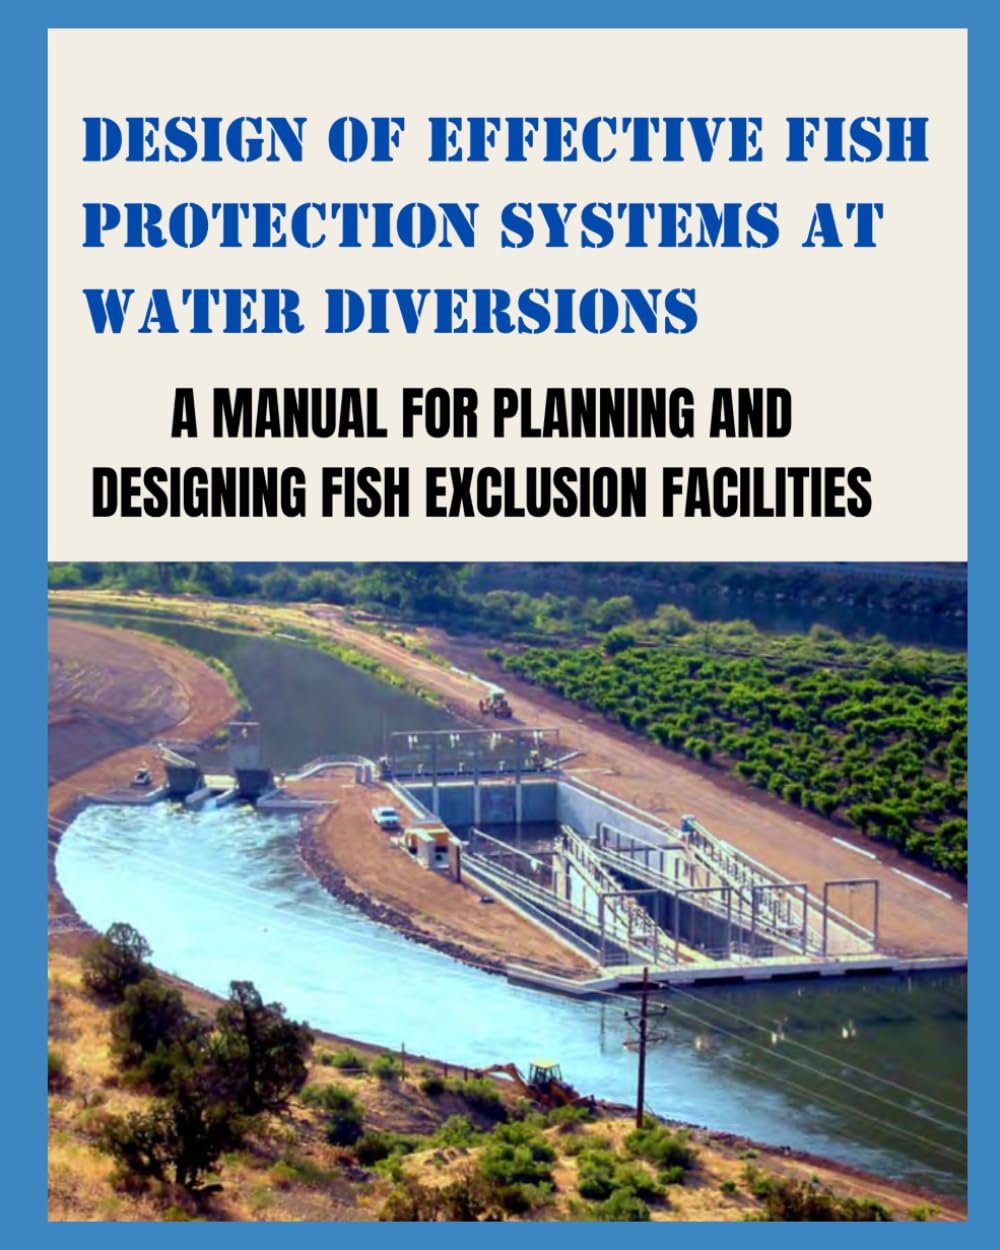 DESIGN OF EFFECTIVE FISH PROTECTION SYSTEMS AT WATER DIVERSIONS: A Manual For Planning And Designing Fish Exclusion Facilities